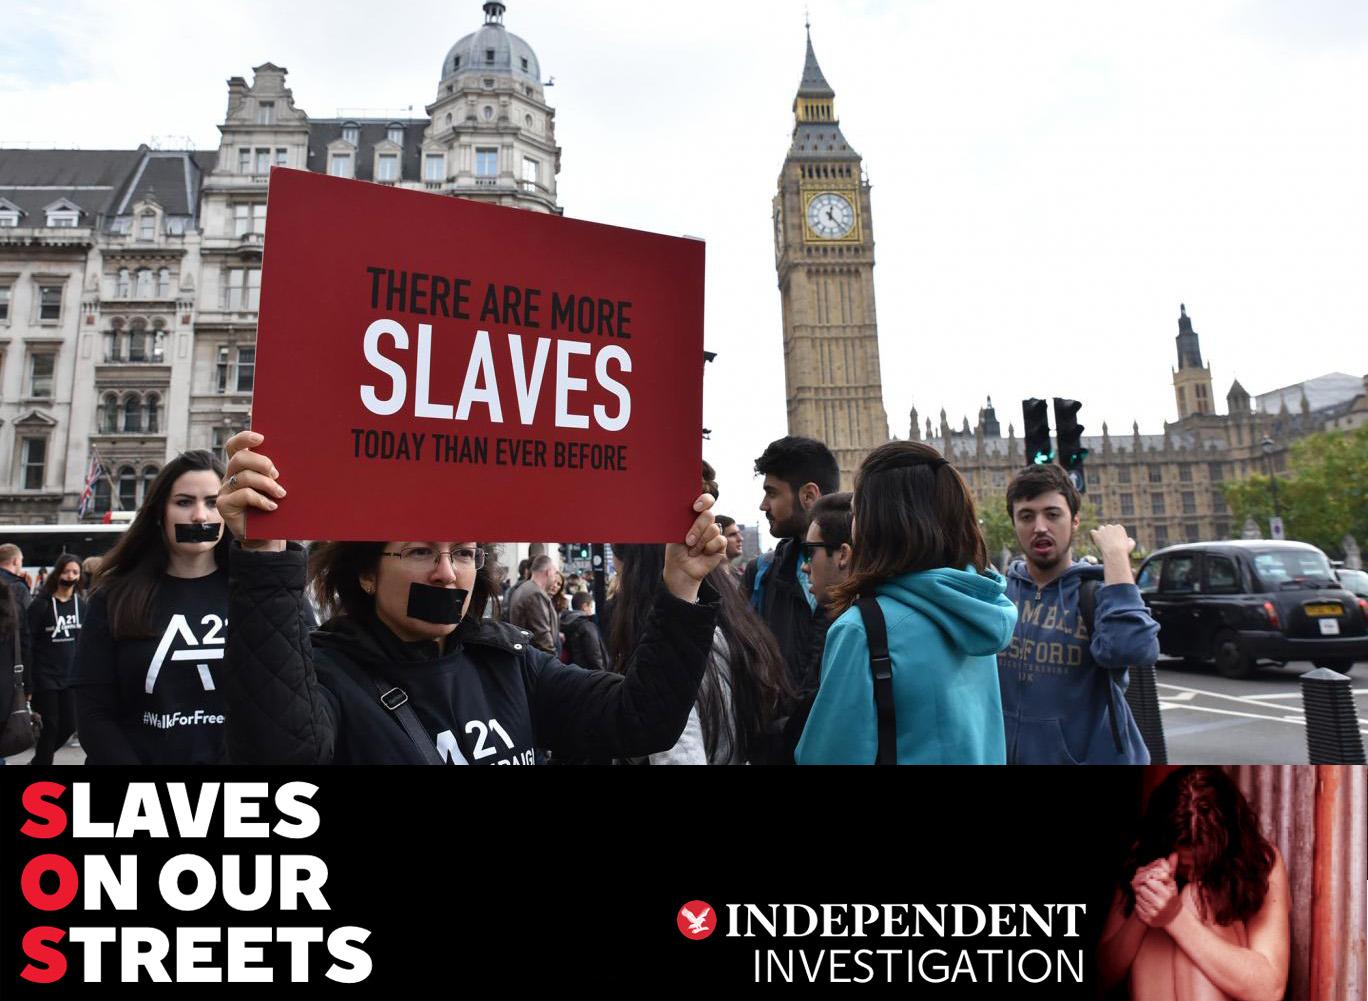 You could see slavery in any public space: if someone is being attacked, slapped or shouted at then suspicions should be raised